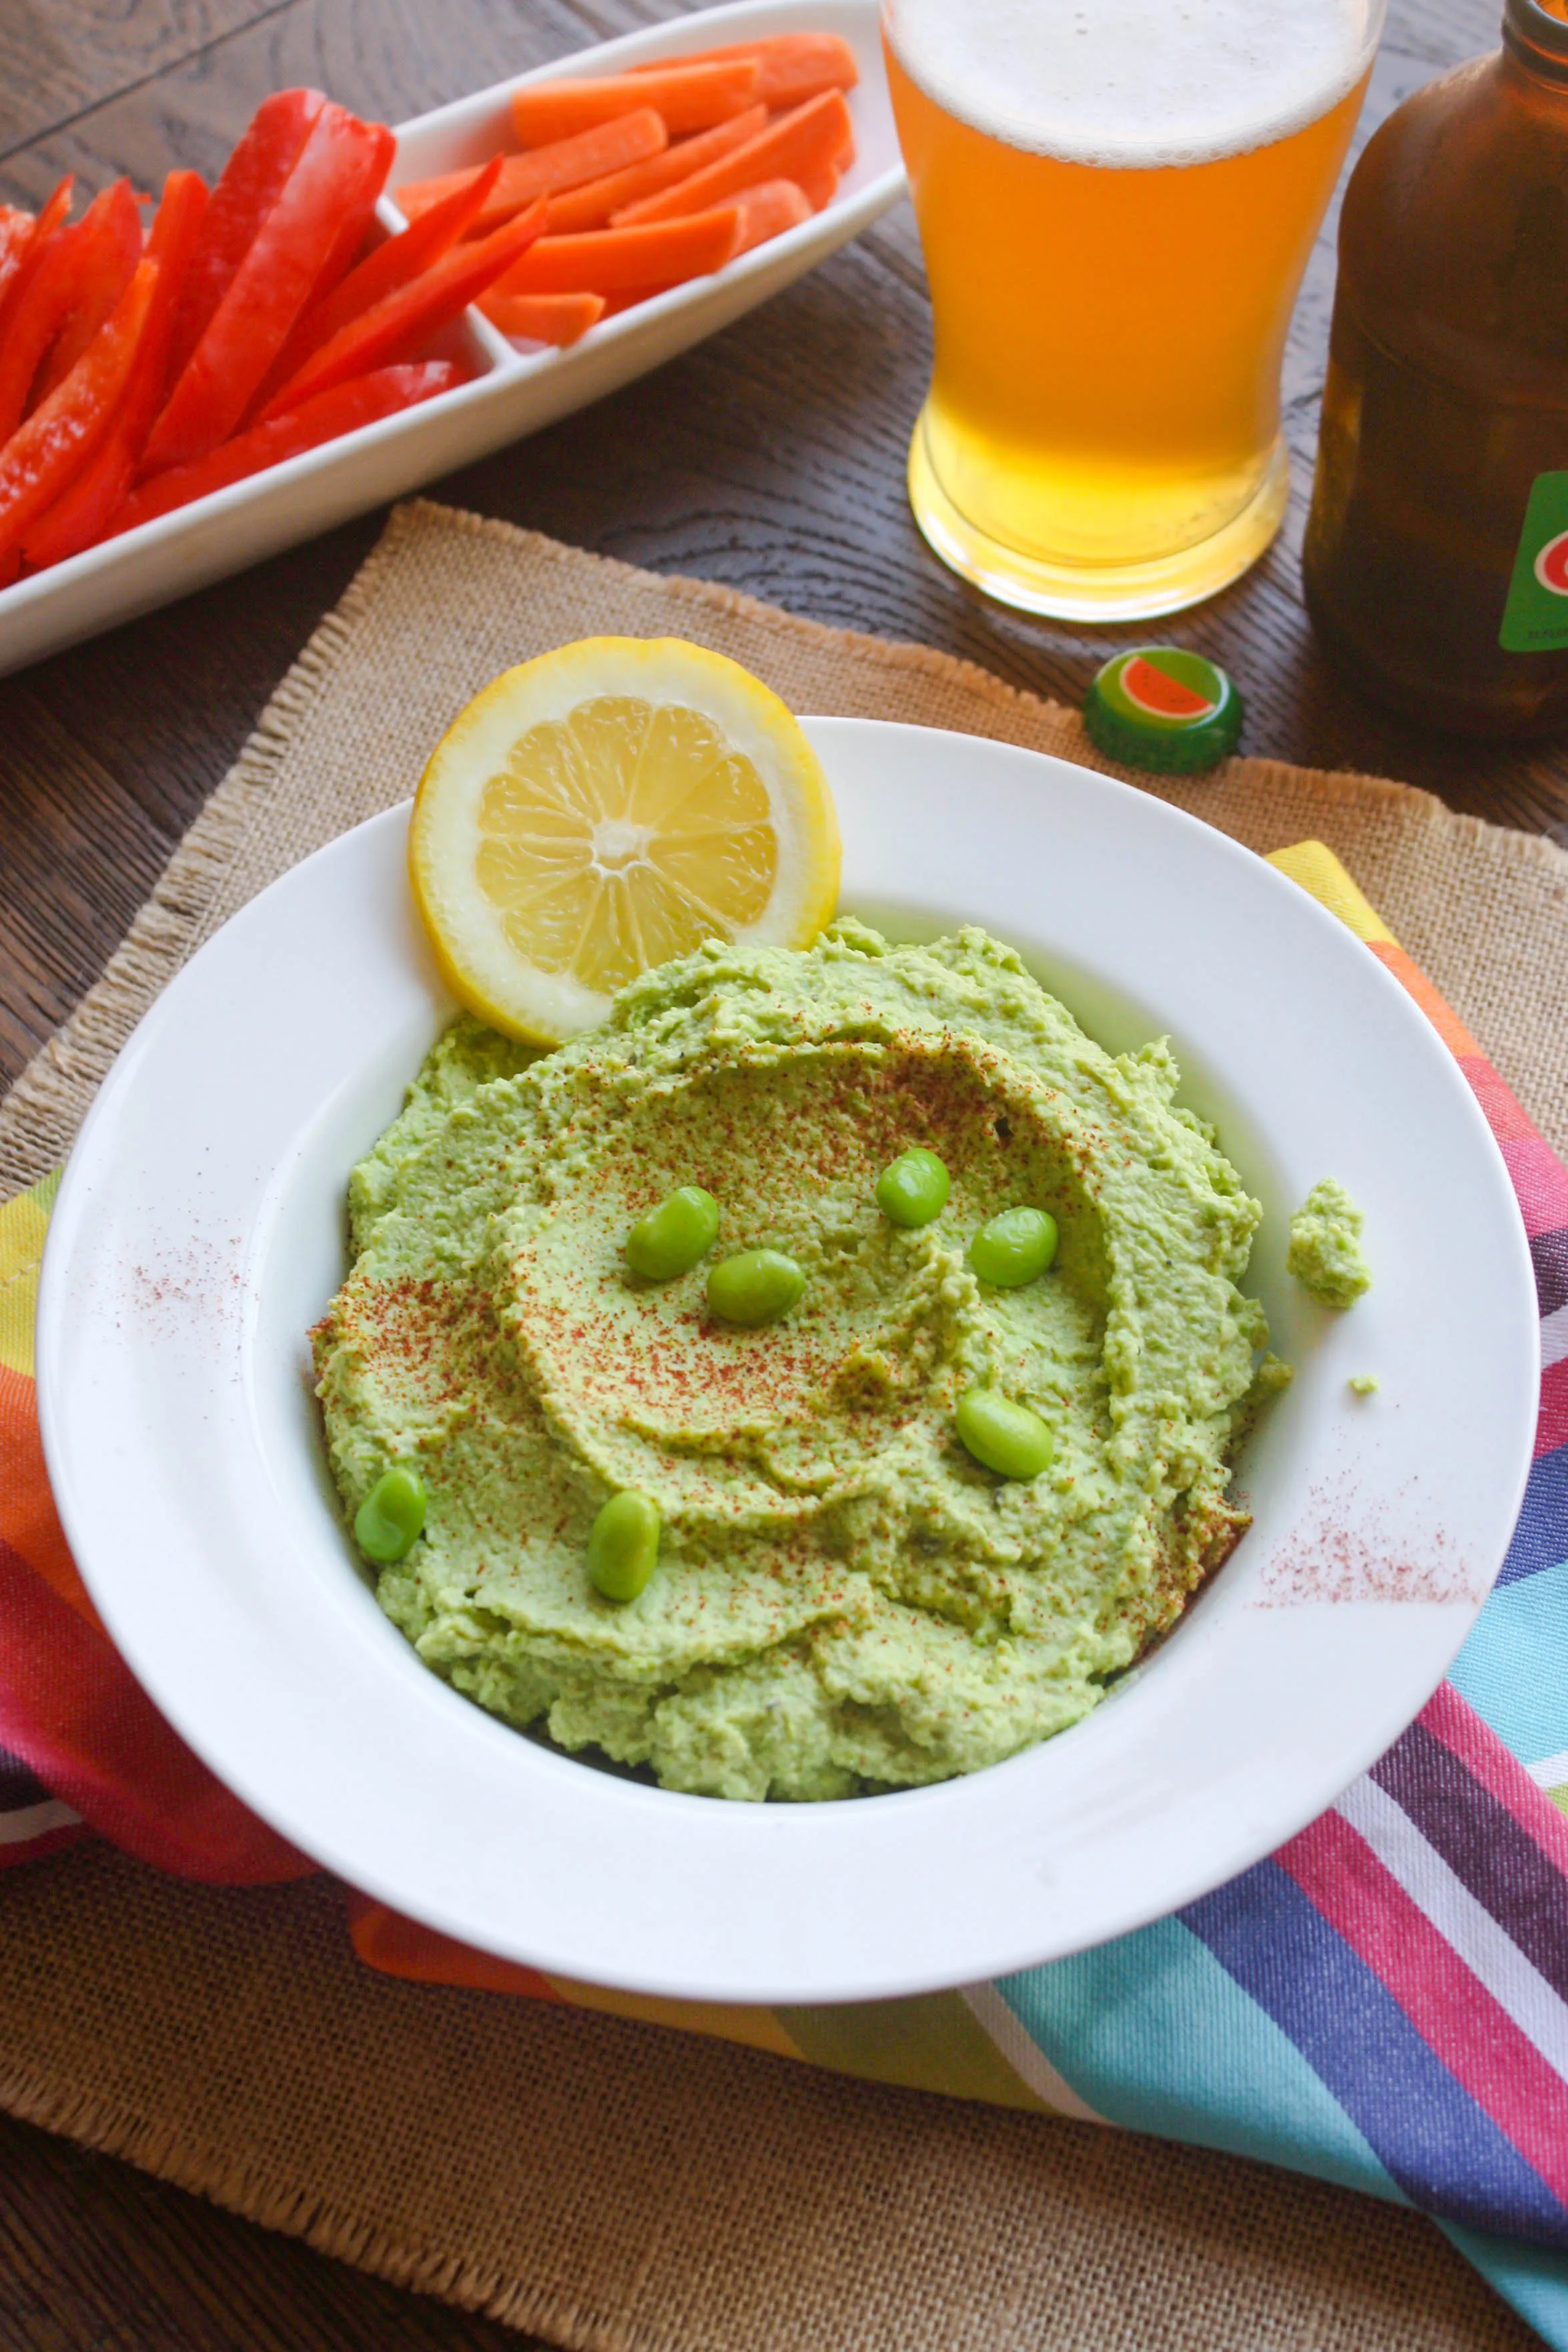 Easy Edamame-Pea Dip is a fun snack that's perfect for parties, picnics, and light meals. You'll love the vibrant color!